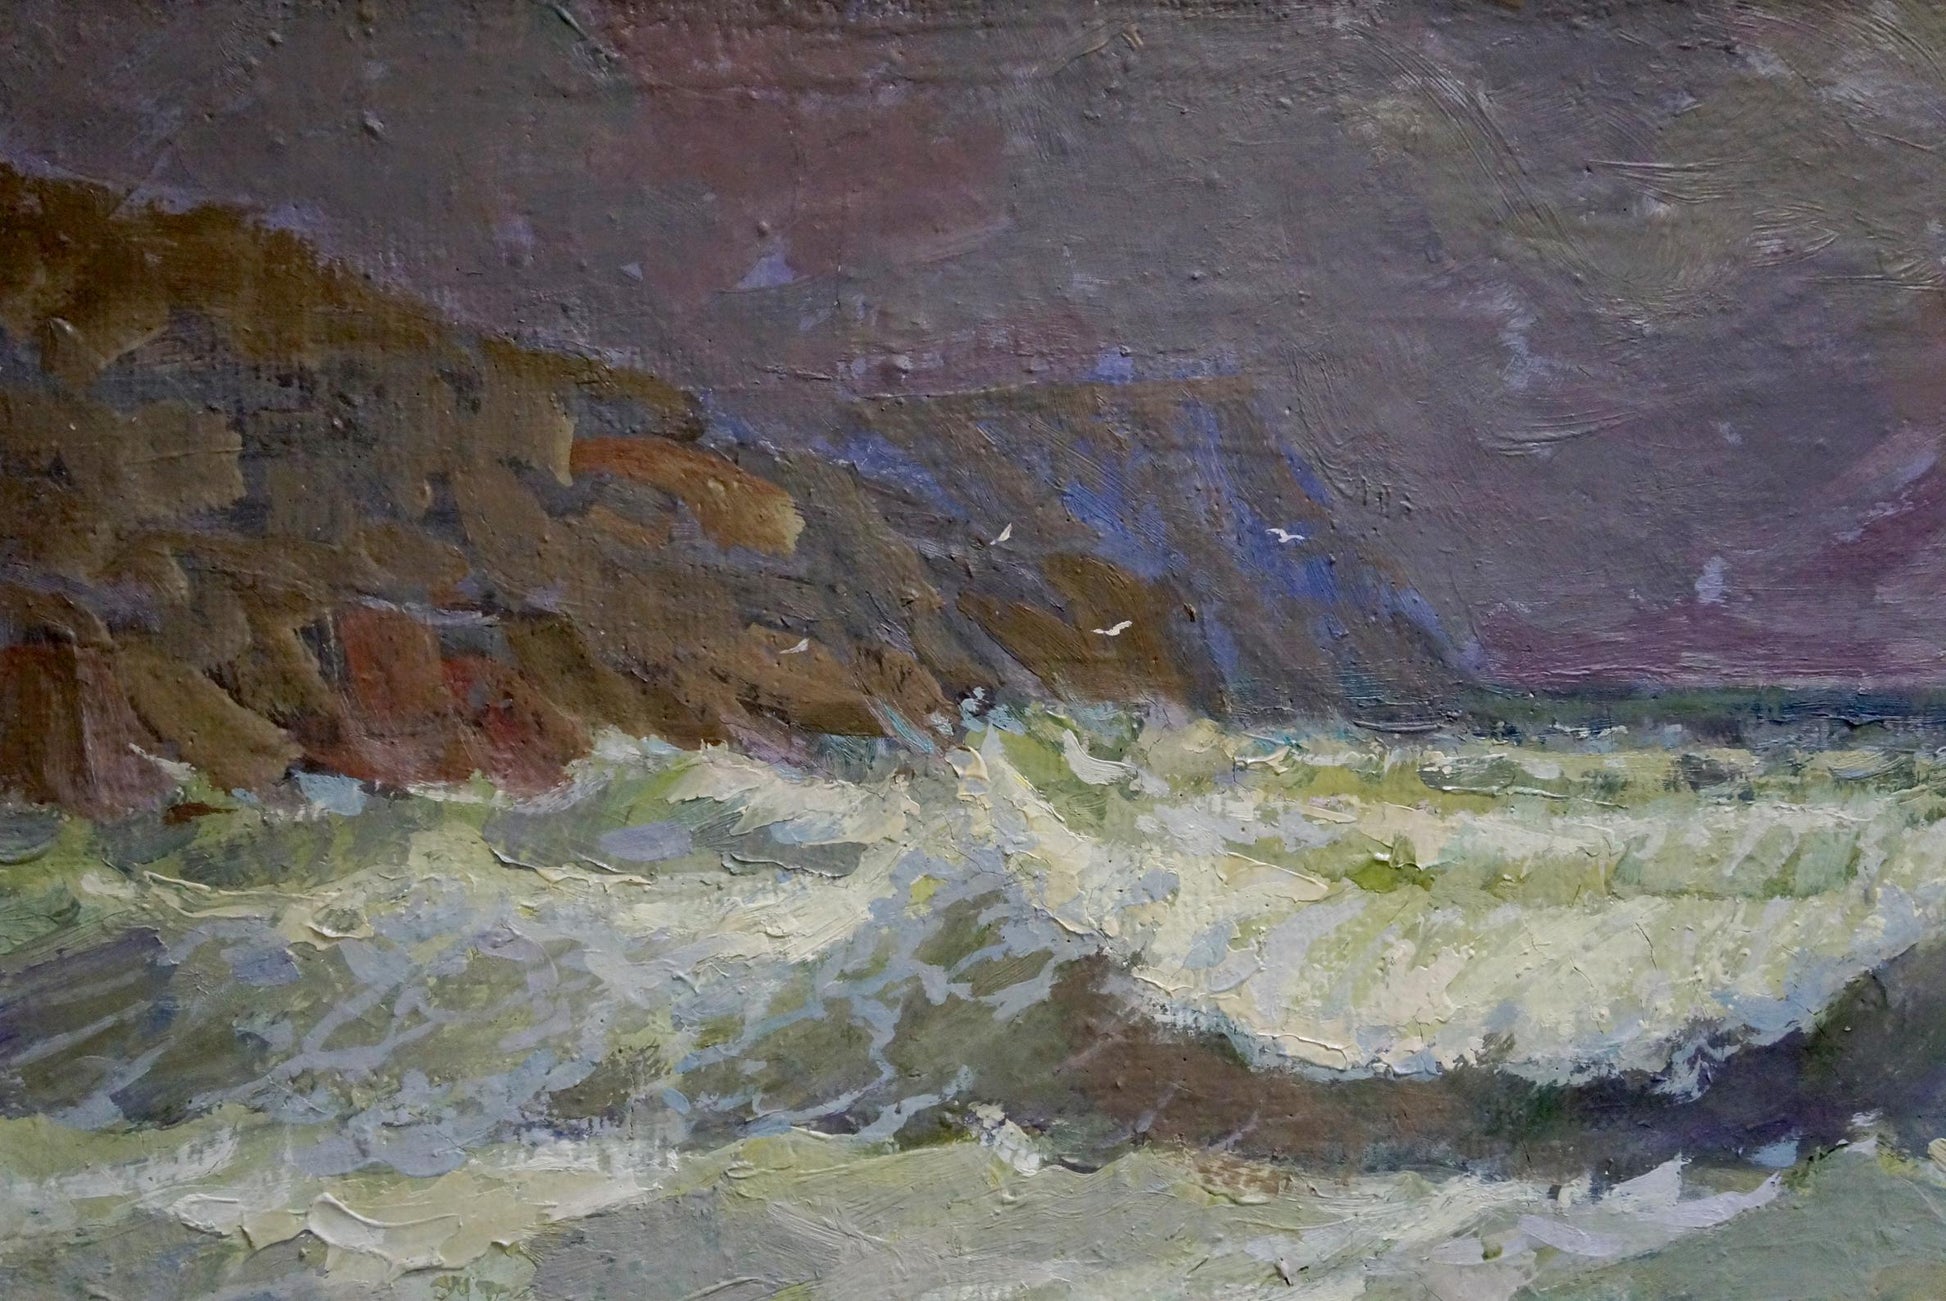 Alexander Petrovich Shadrin depicted a raging sea in an oil painting